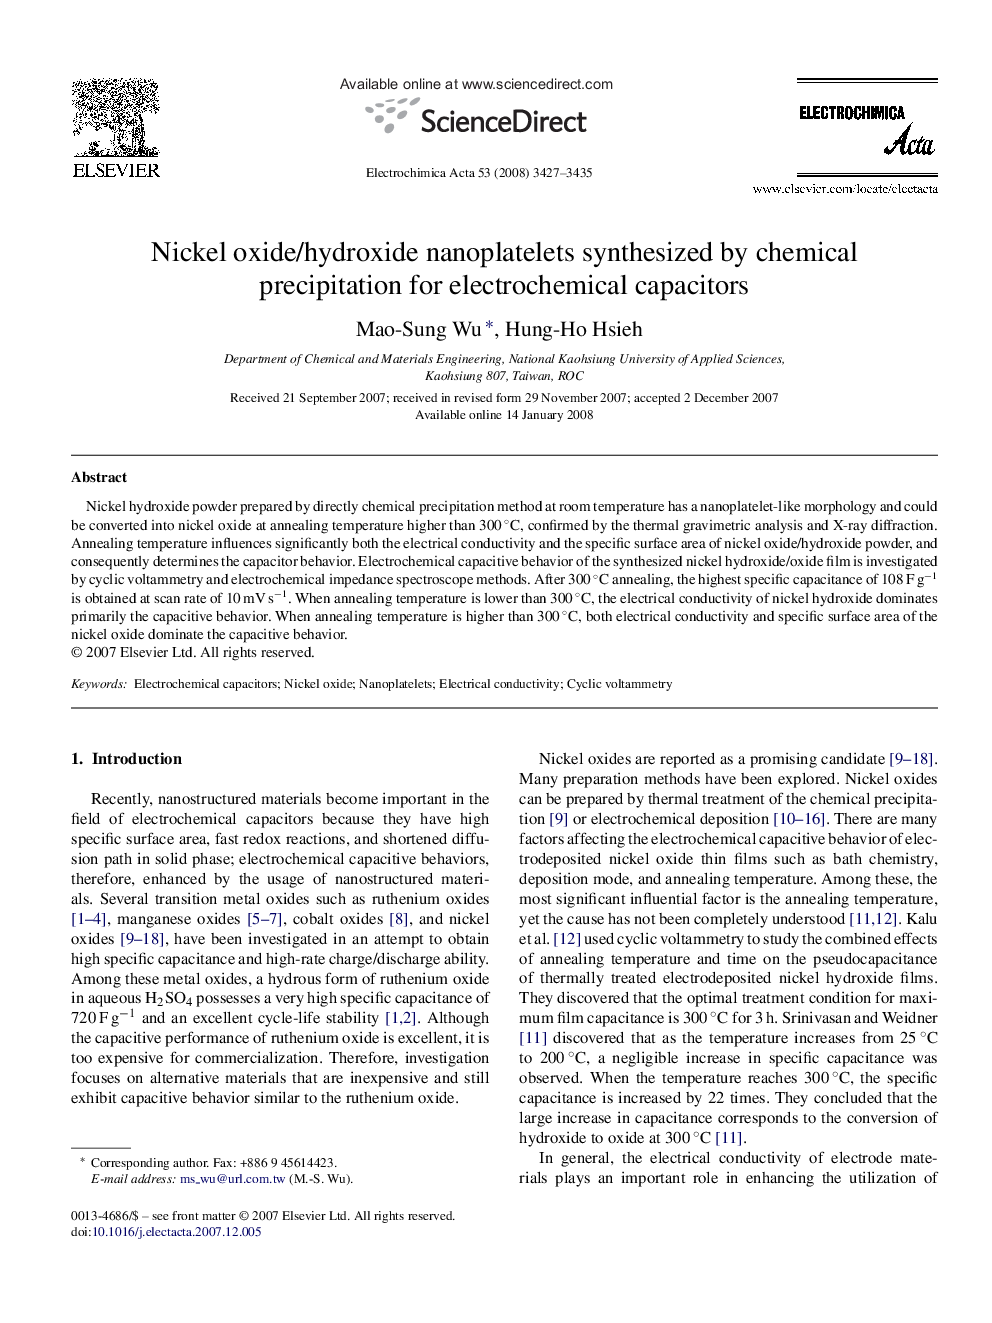 Nickel oxide/hydroxide nanoplatelets synthesized by chemical precipitation for electrochemical capacitors